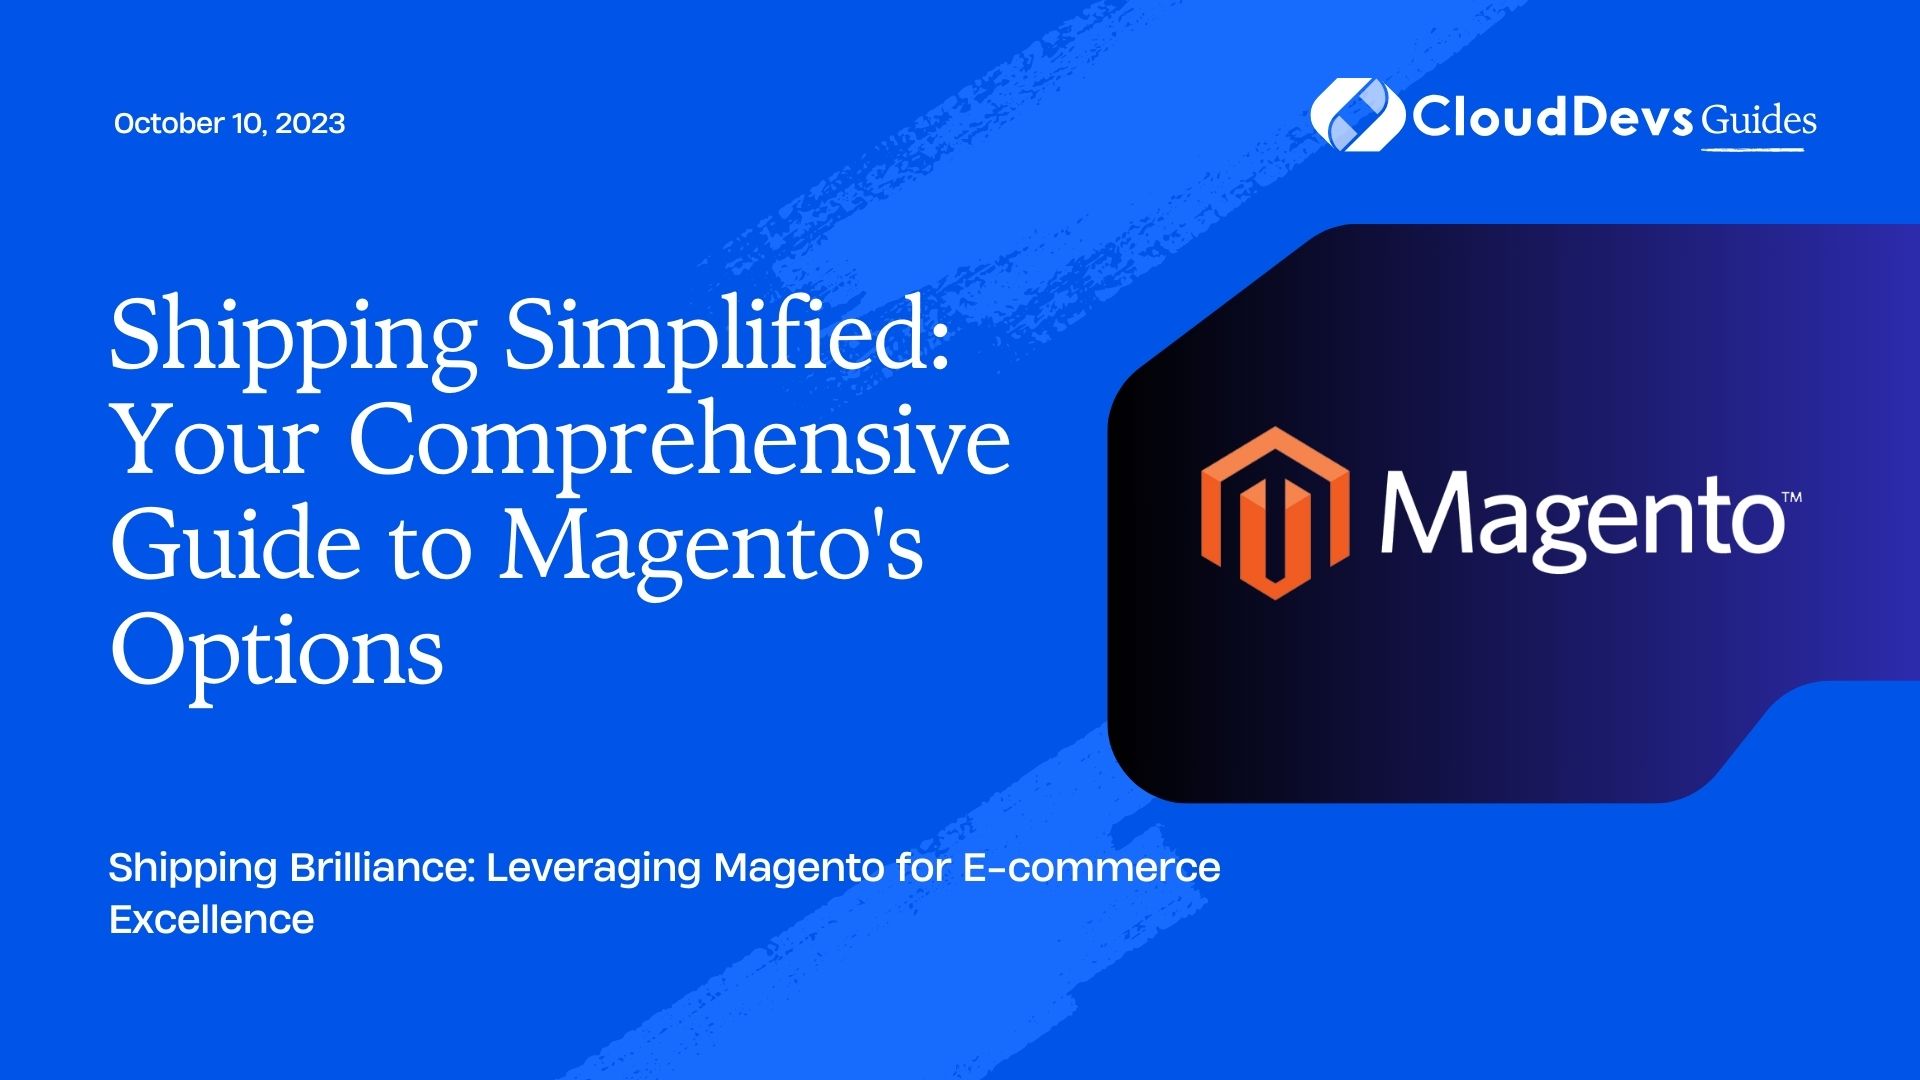 Shipping Simplified: Your Comprehensive Guide to Magento's Options